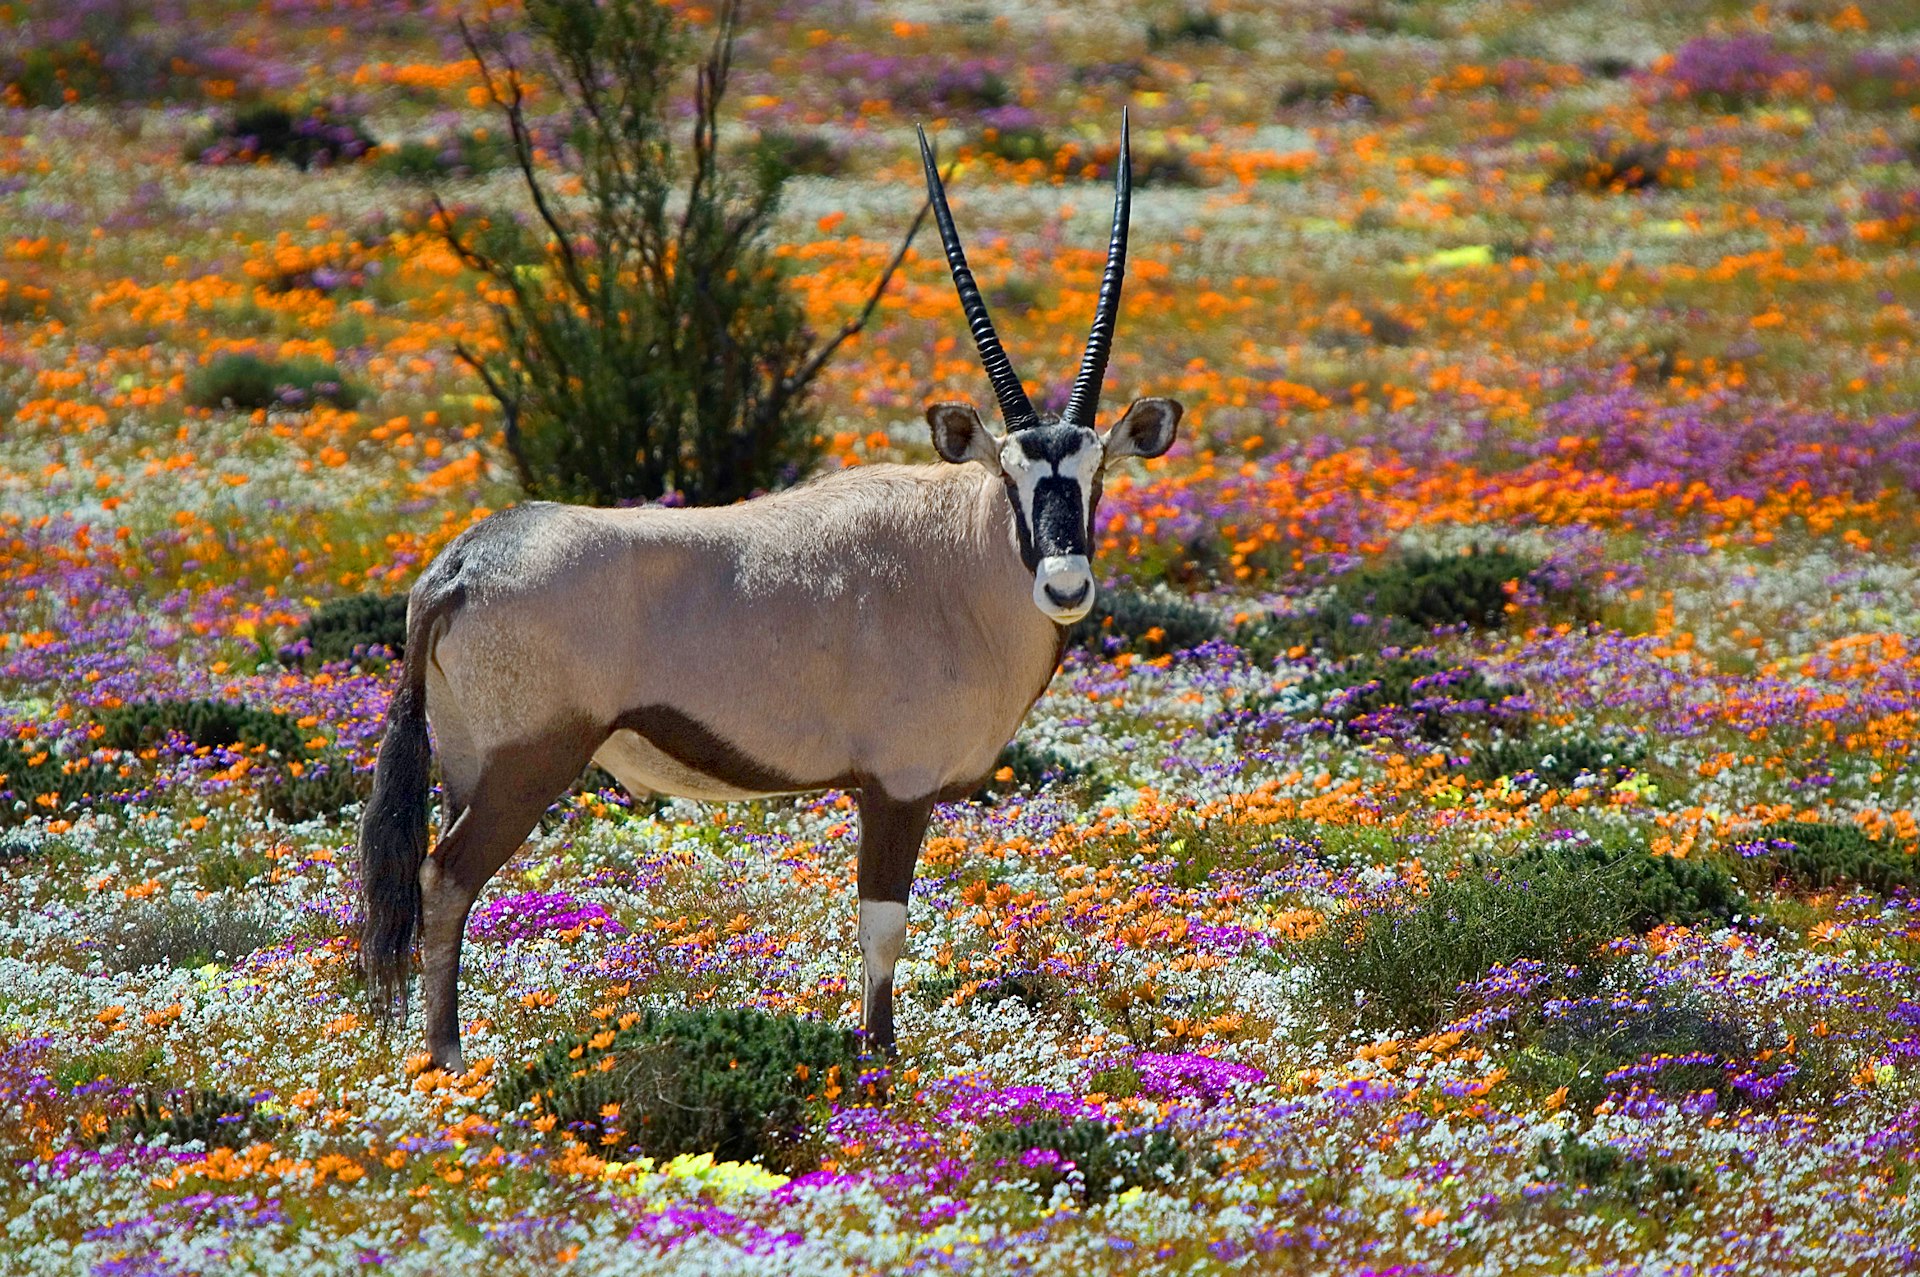 Oryx standing in a field of flowers, Namaqualand, South Africa